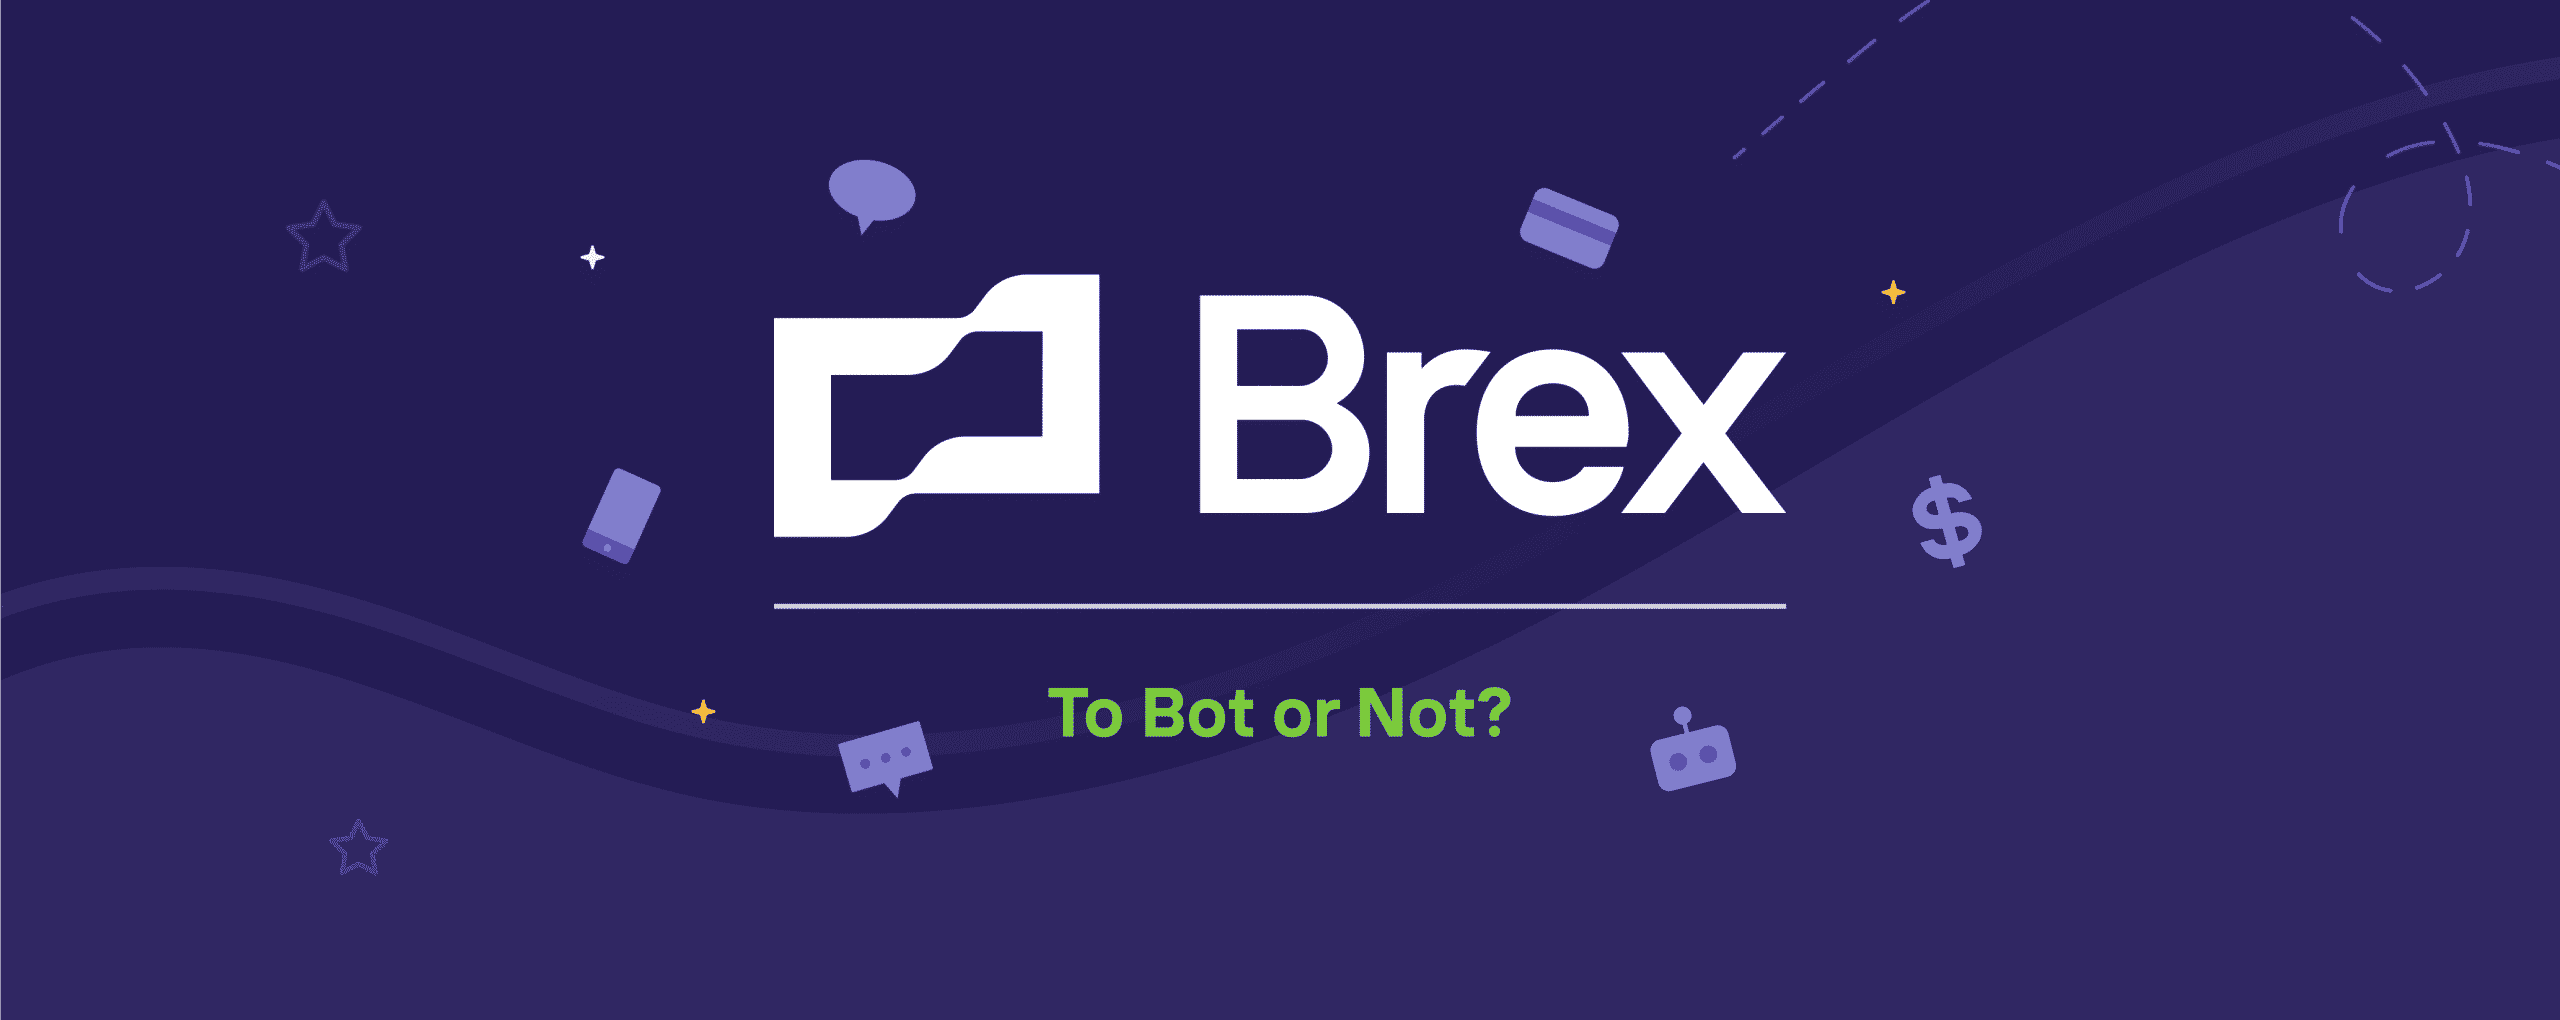 What You Missed from the “Bot or Not” Webinar with Brex Banner Image